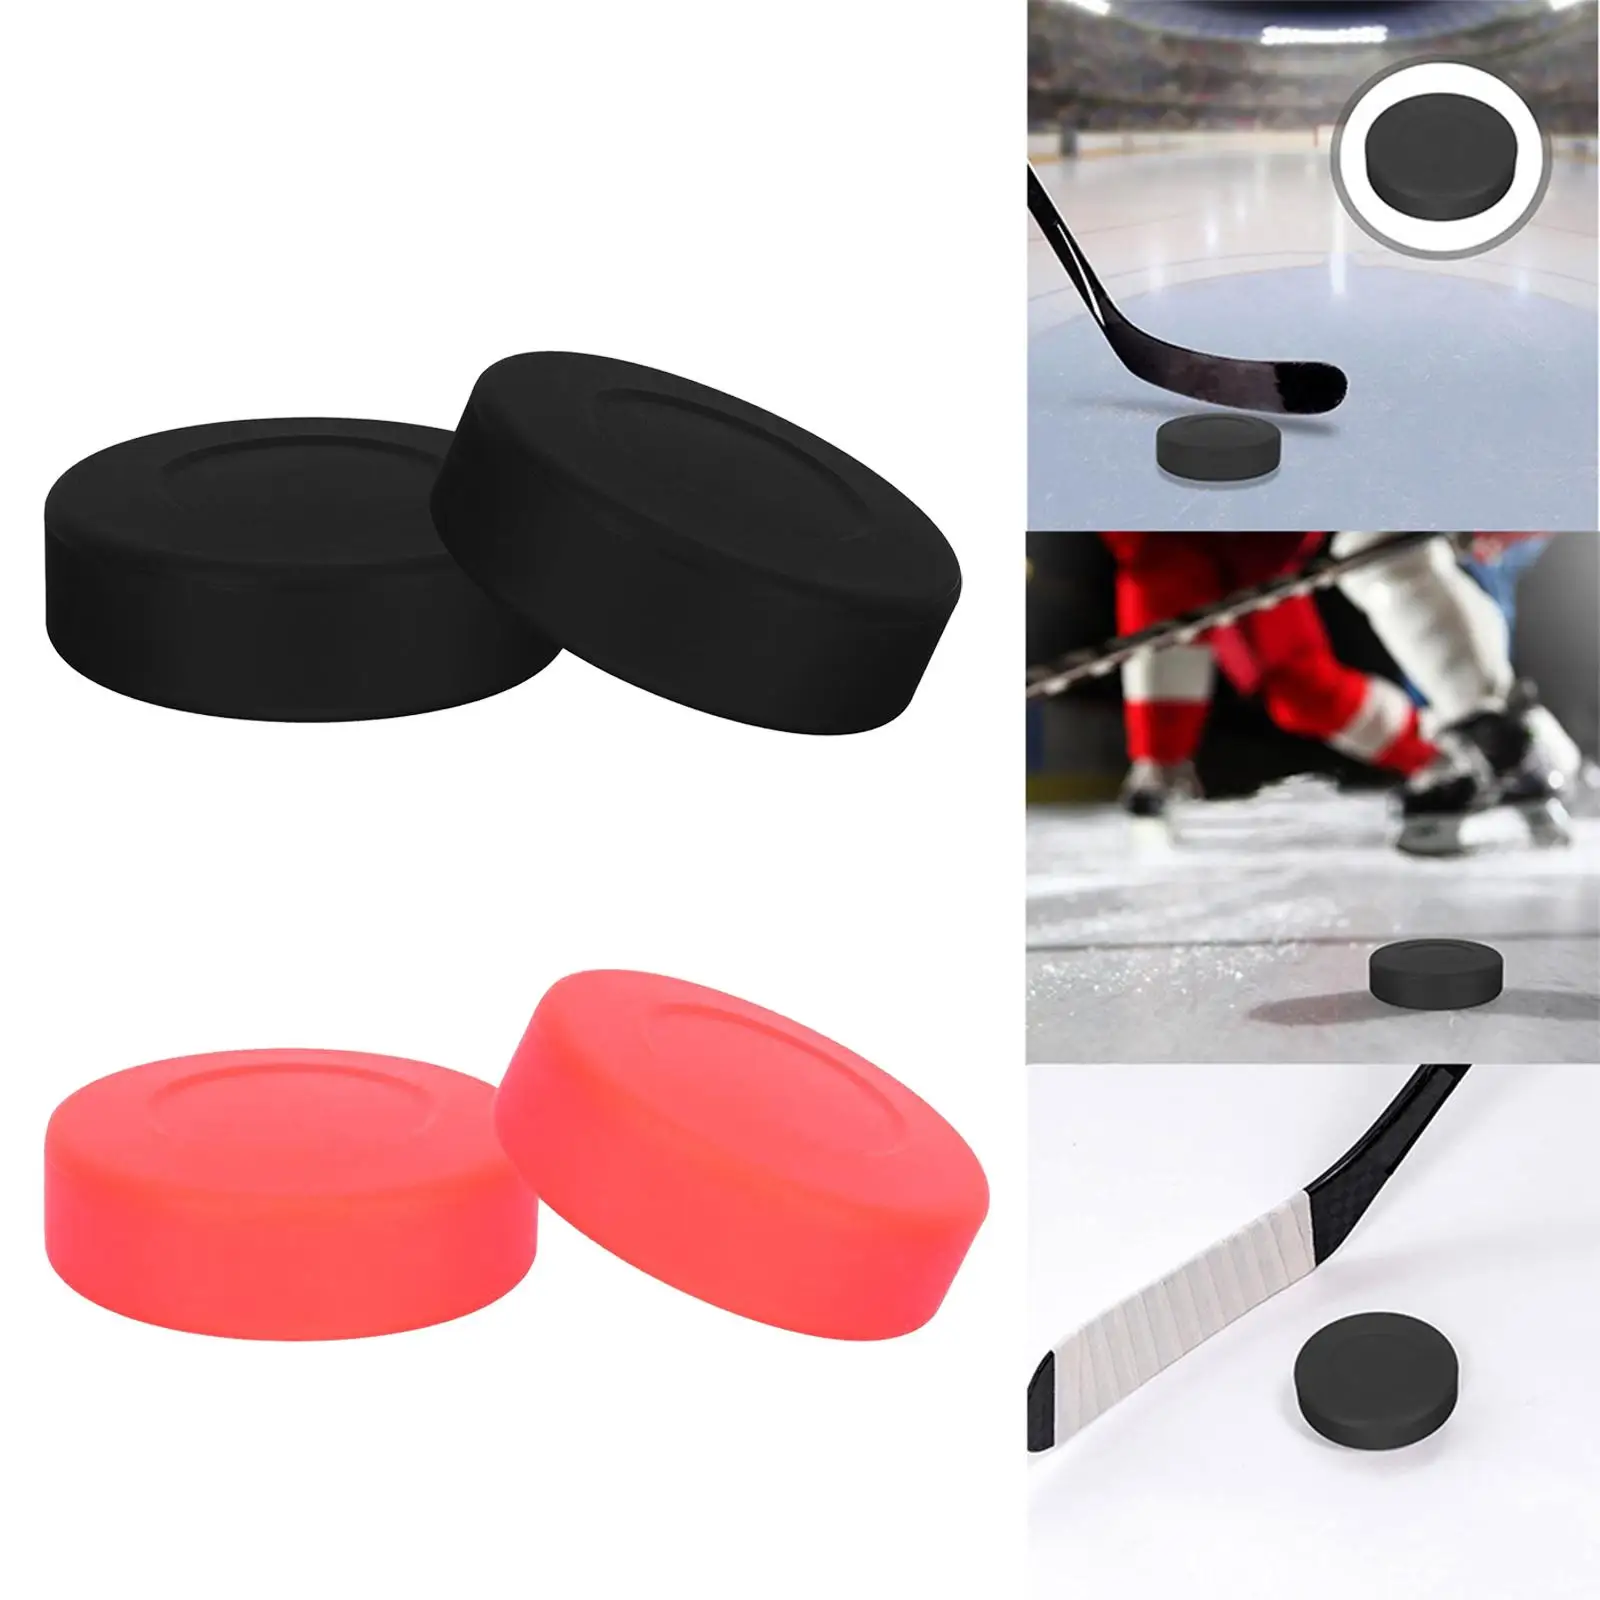 2 Pieces Ice Hockey Puck Sturdy Ice Hockey Accessories Multipurpose for Beginners Children Teenagers Professionals Exercise